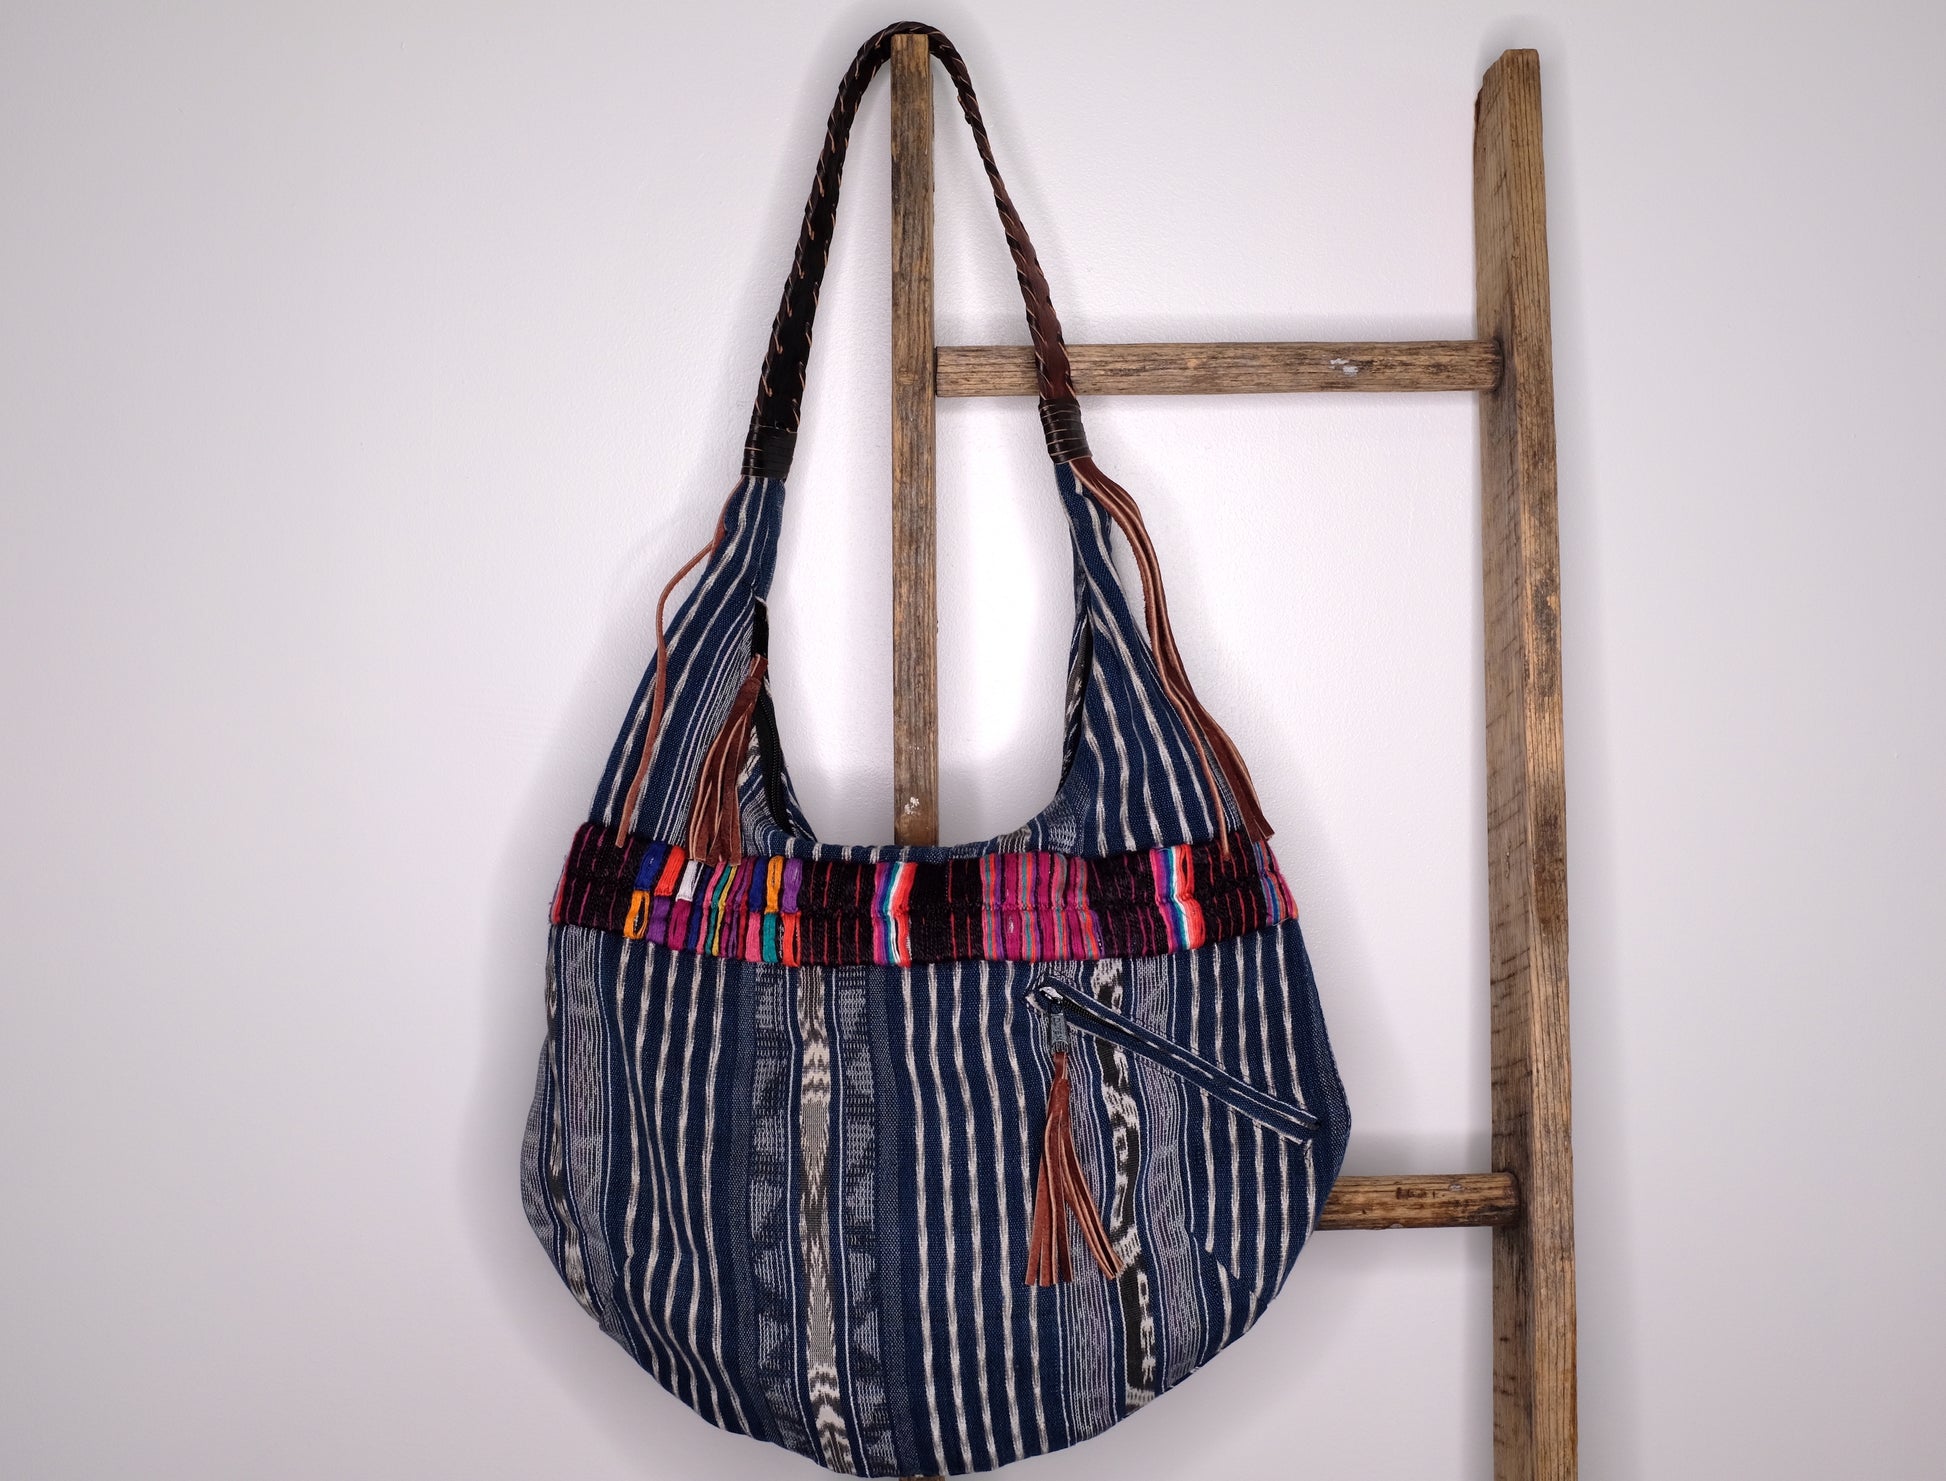 Blue handbag made with recycled Guatemala textiles, embroidery and leather fringe. Hanging on a ladder.